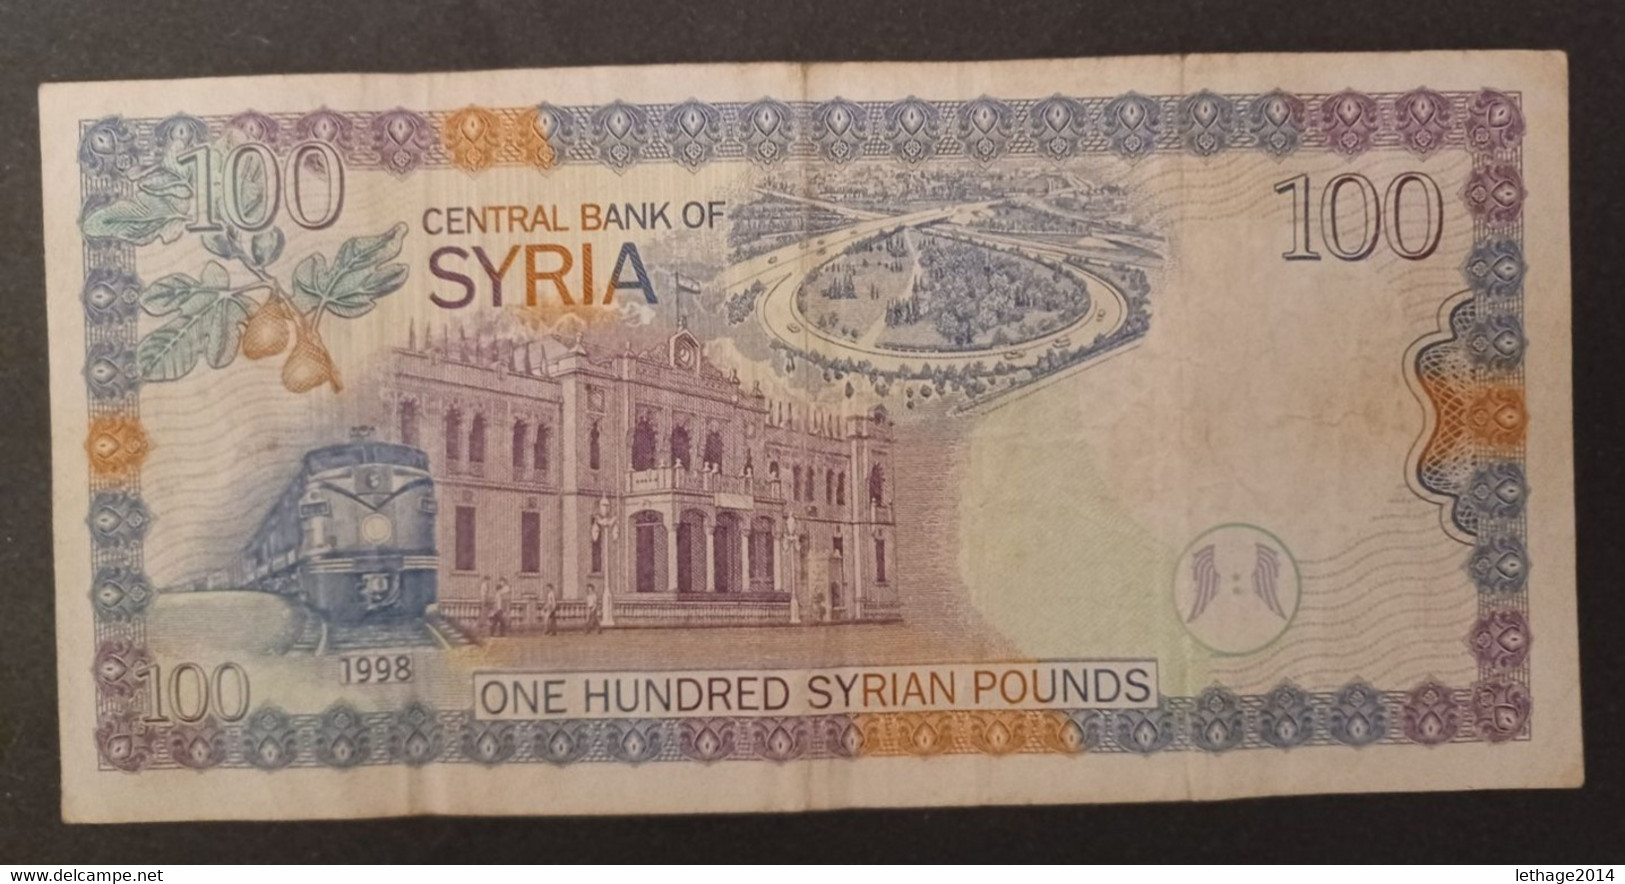 BANKNOTE سوريا  SYRIA  100 POUNDS ALEPPO 1998 CIRCULATED - Siria